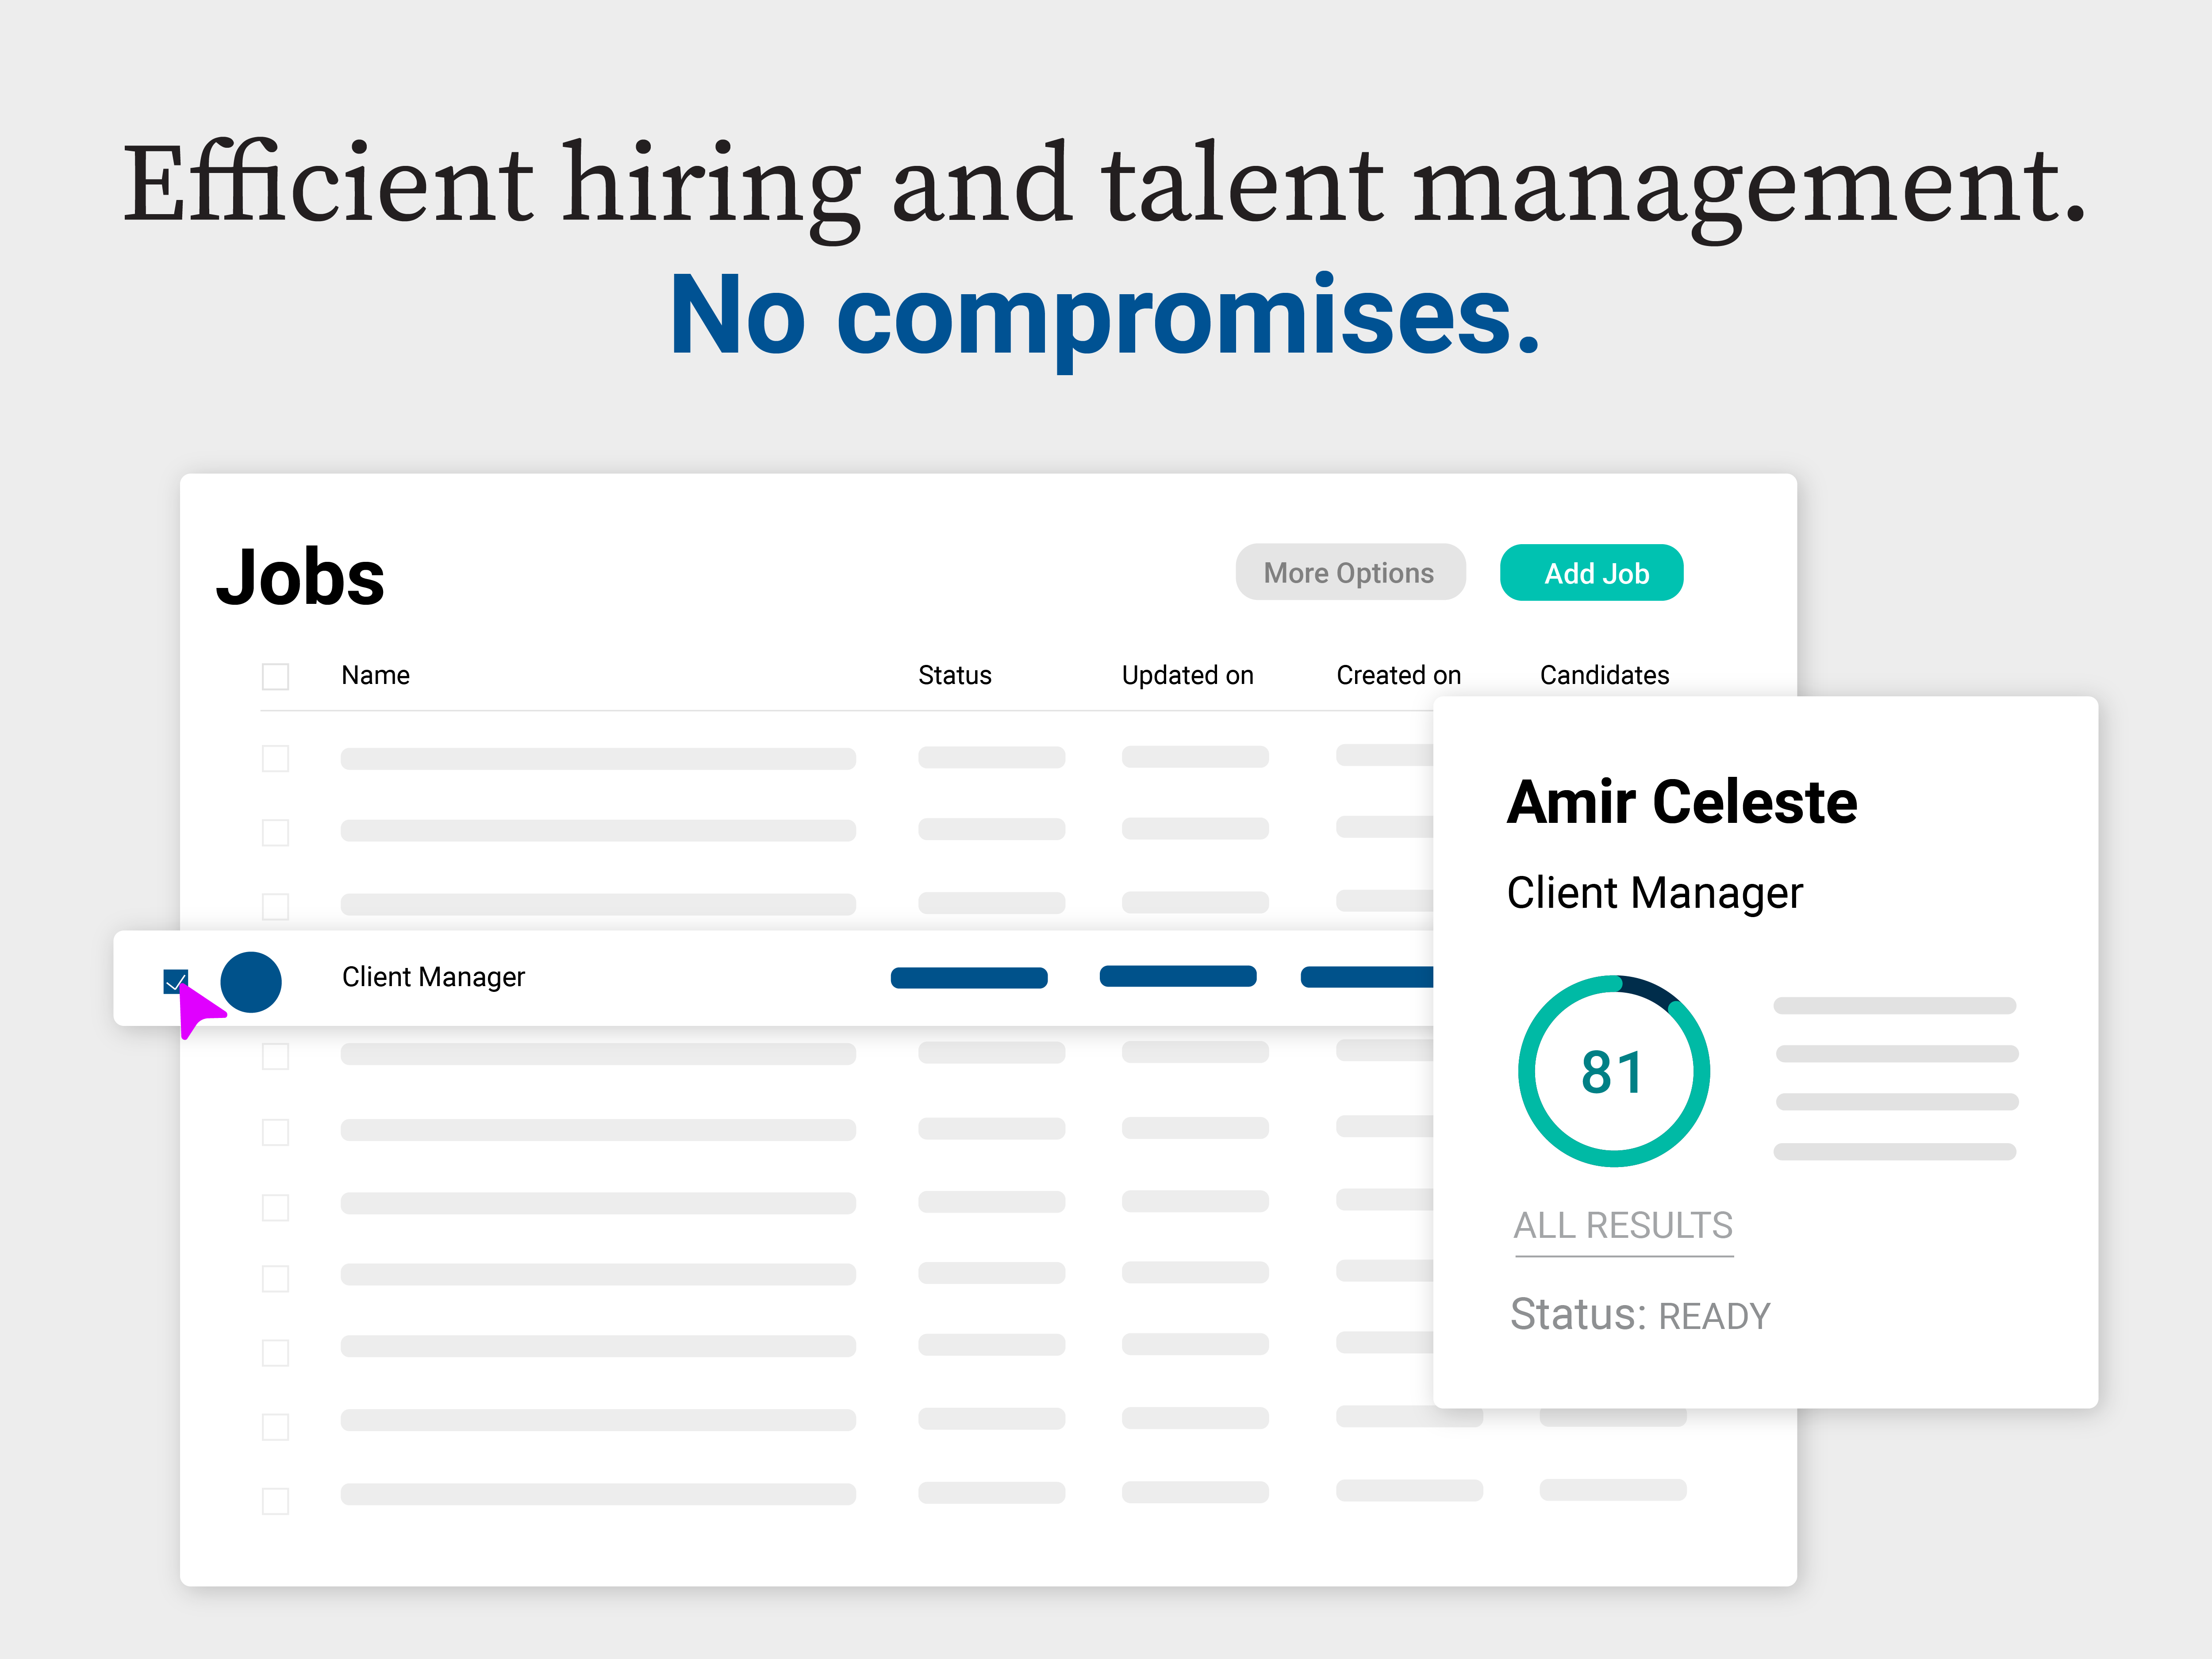 Armed with bias-free, 10x more accurate talent data, you can make fast and successful talent decisions.